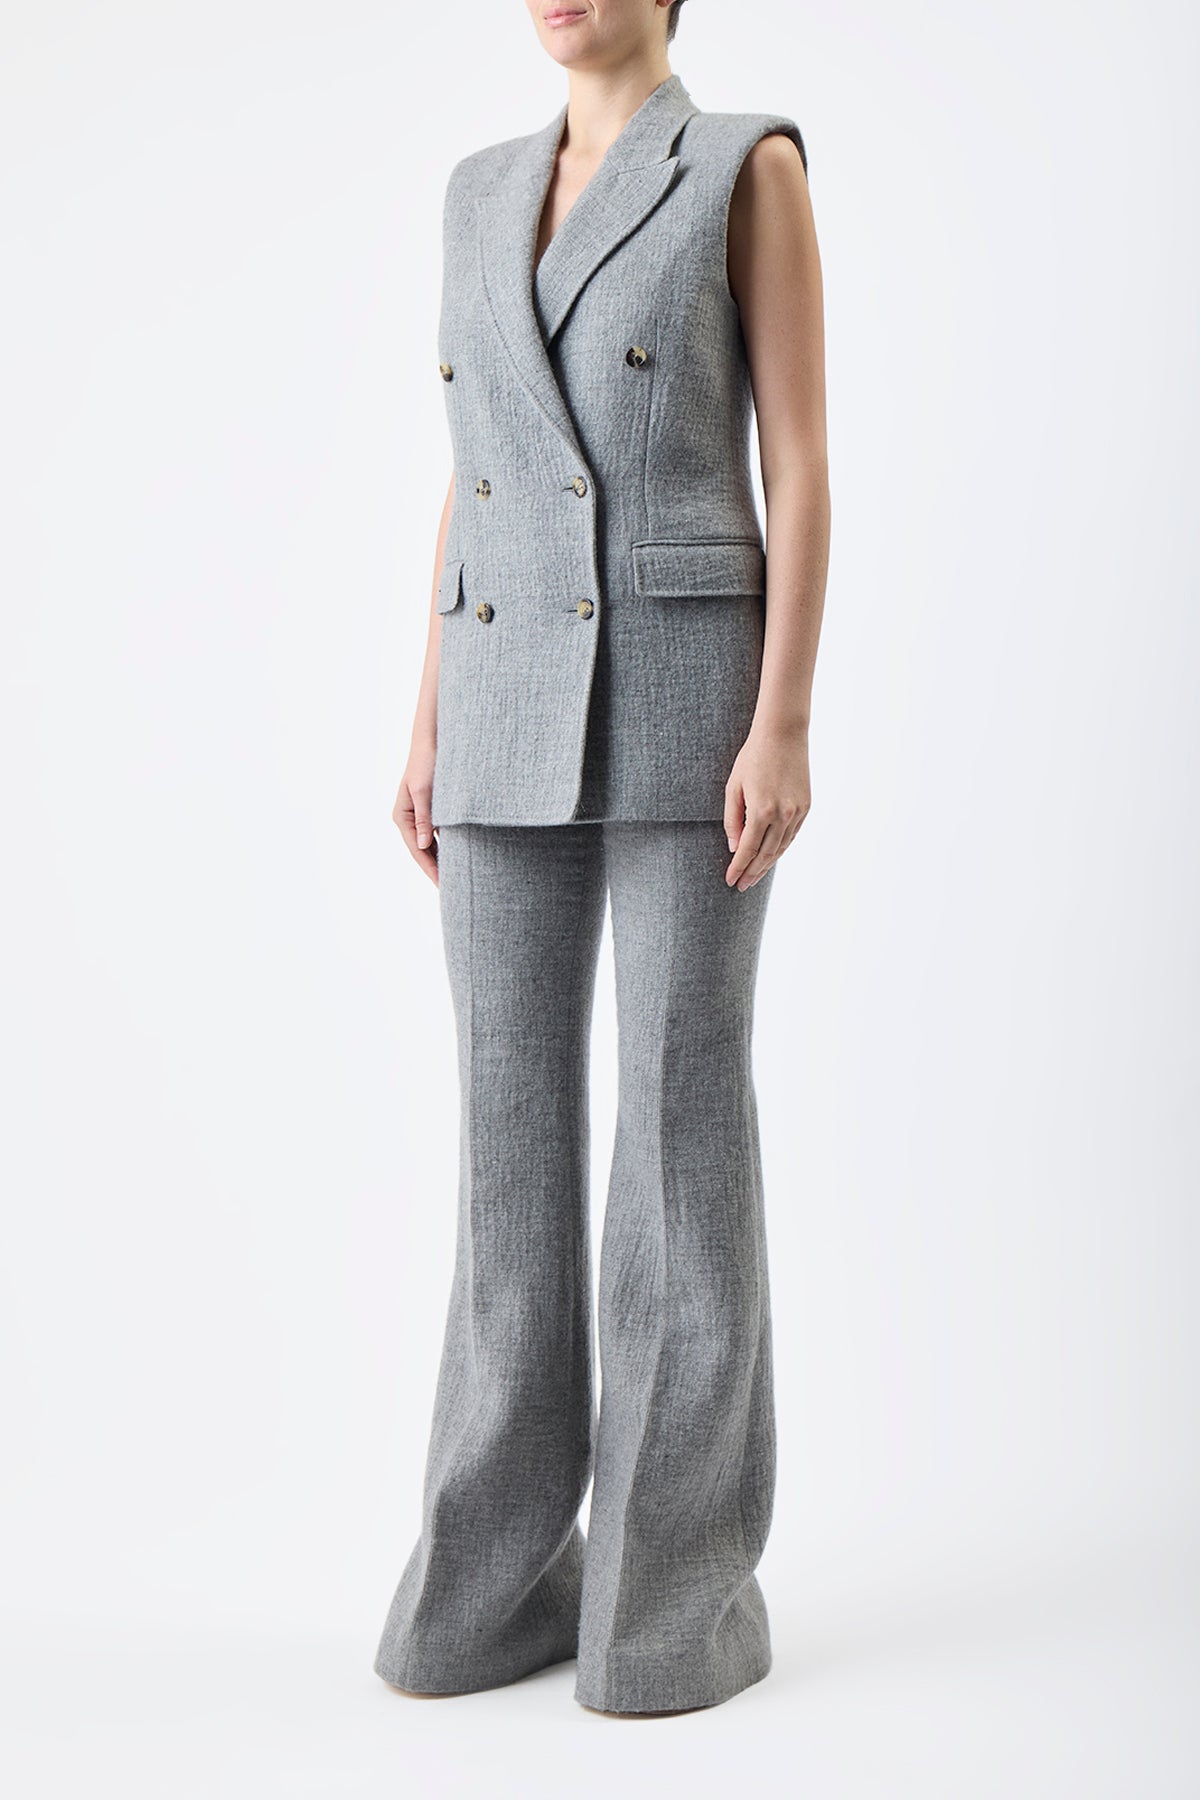 Mayte Vest in Eco-Cashmere Linen